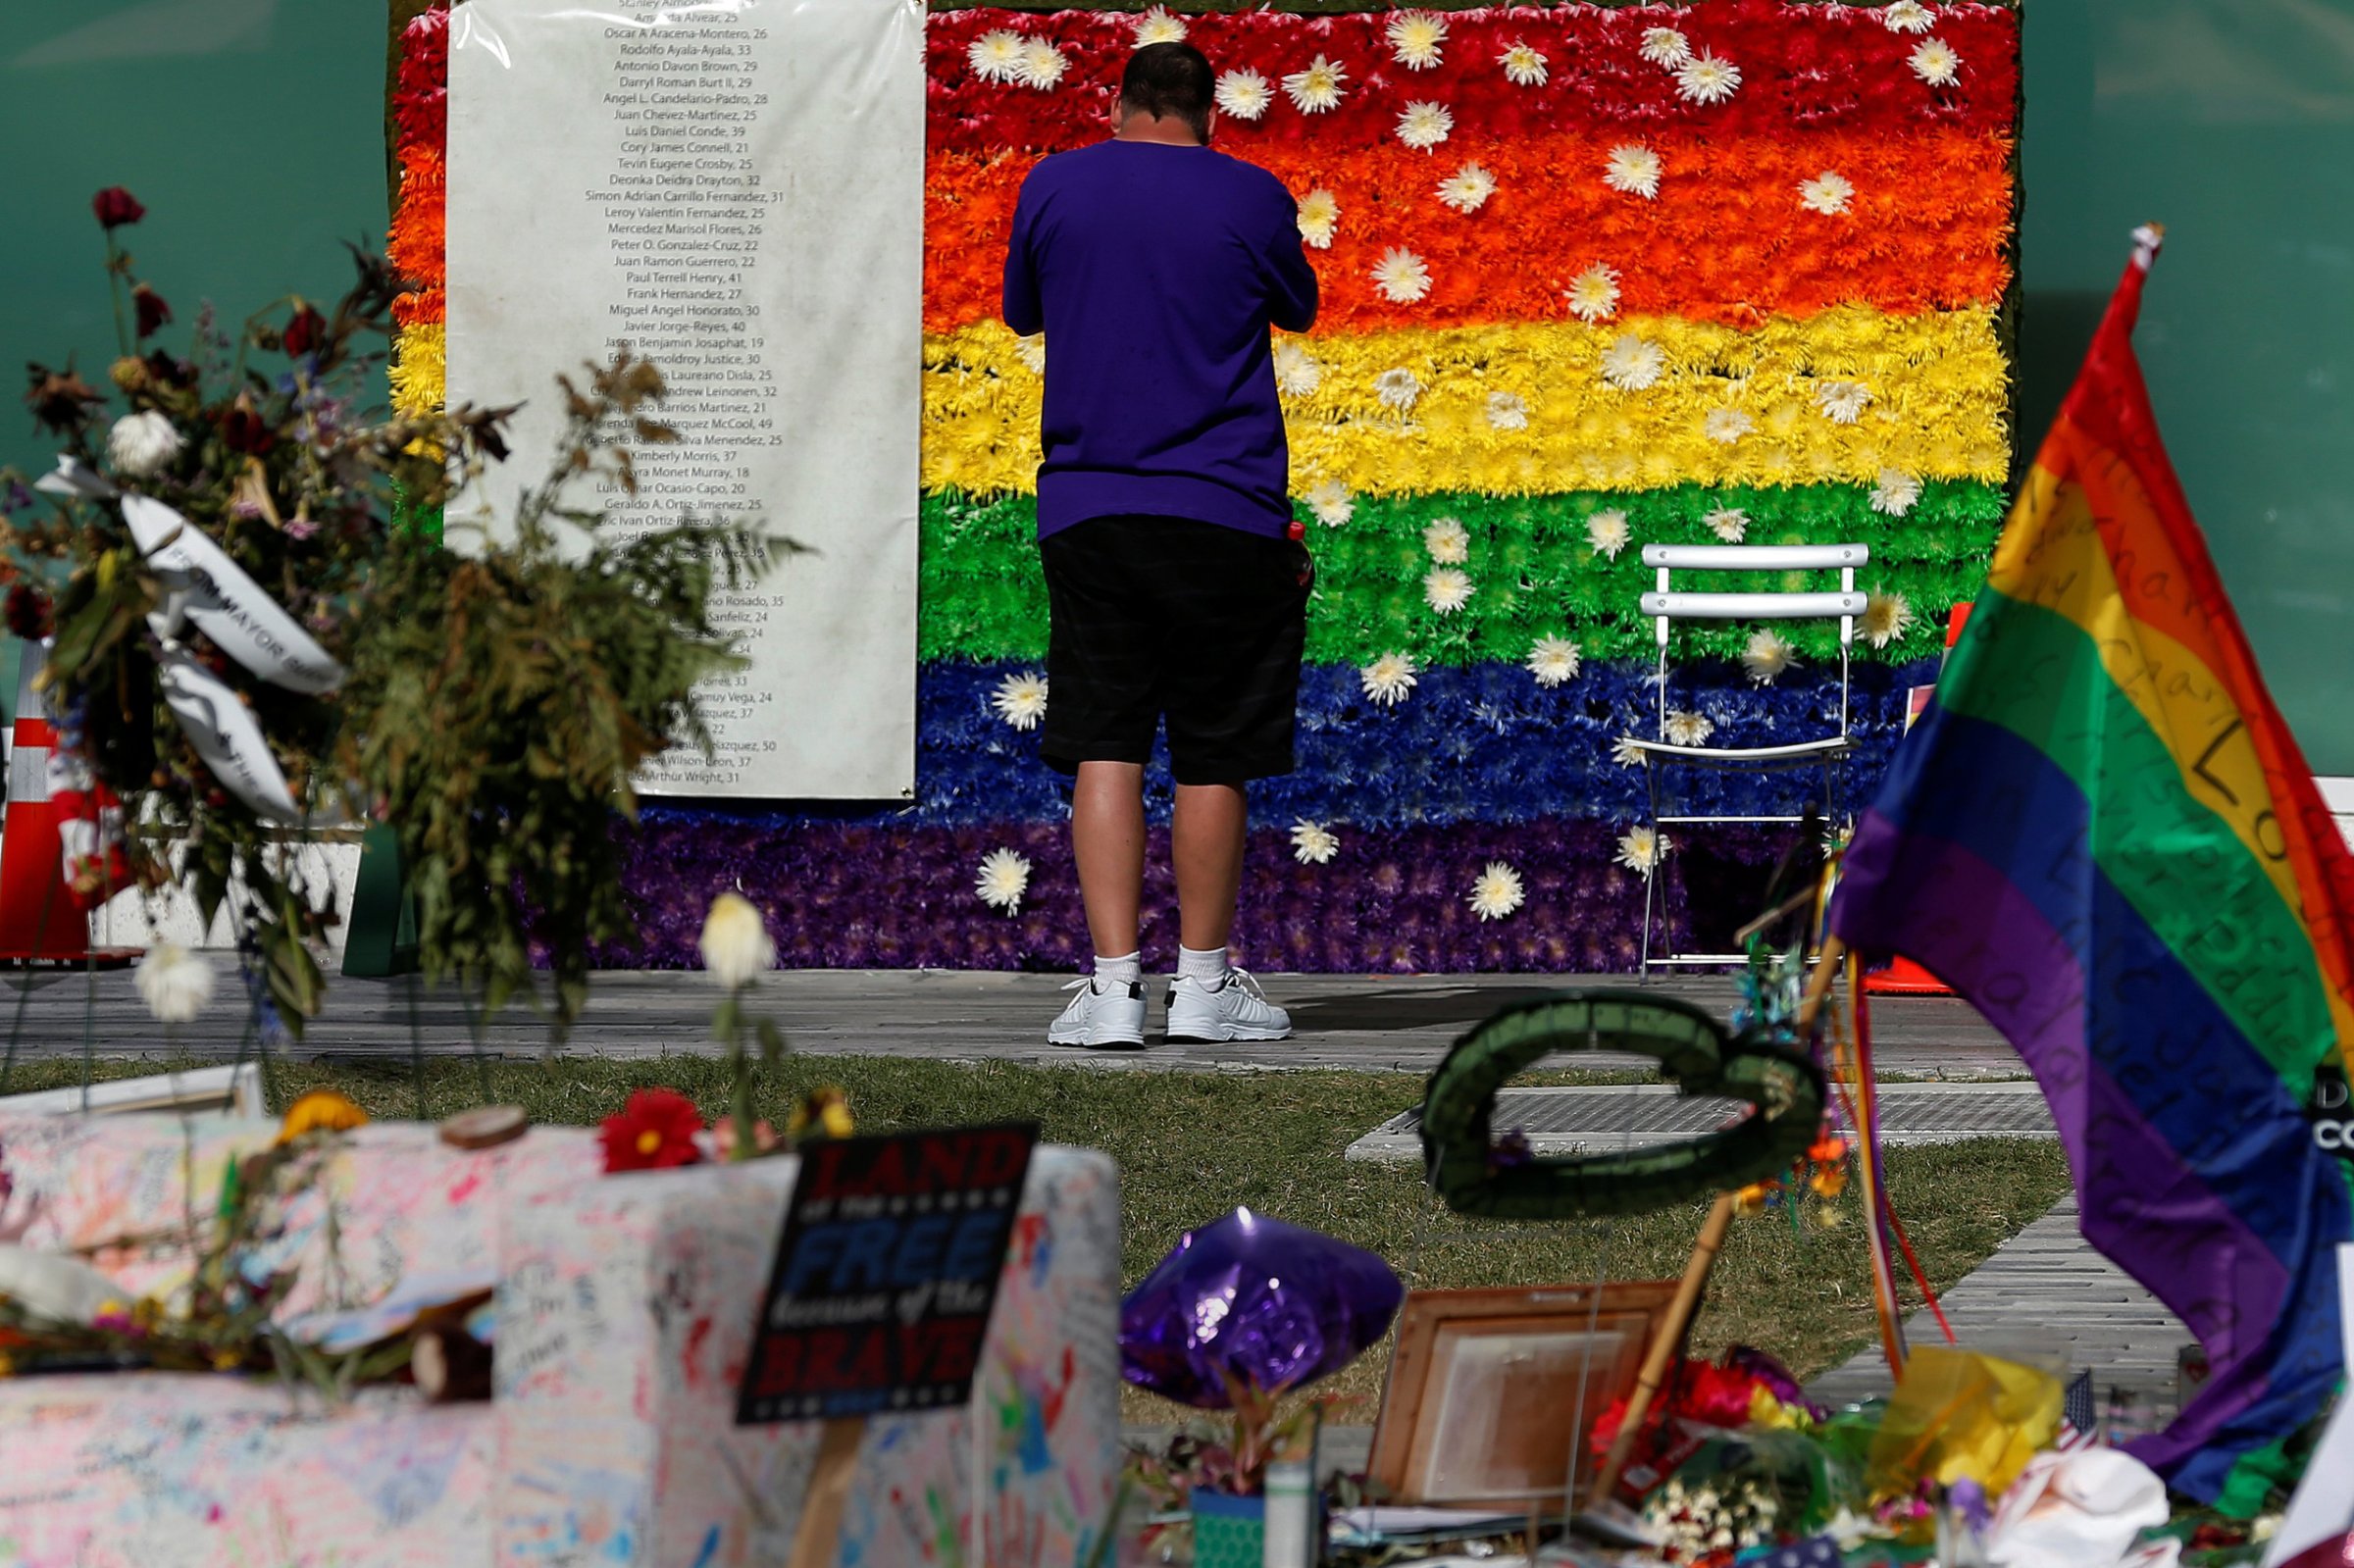 A man pays respect at a rainbow flower wall as part of the makeshift memorial for the Pulse nightclub mass shooting victims last week in Orlando, on June 21, 2016.